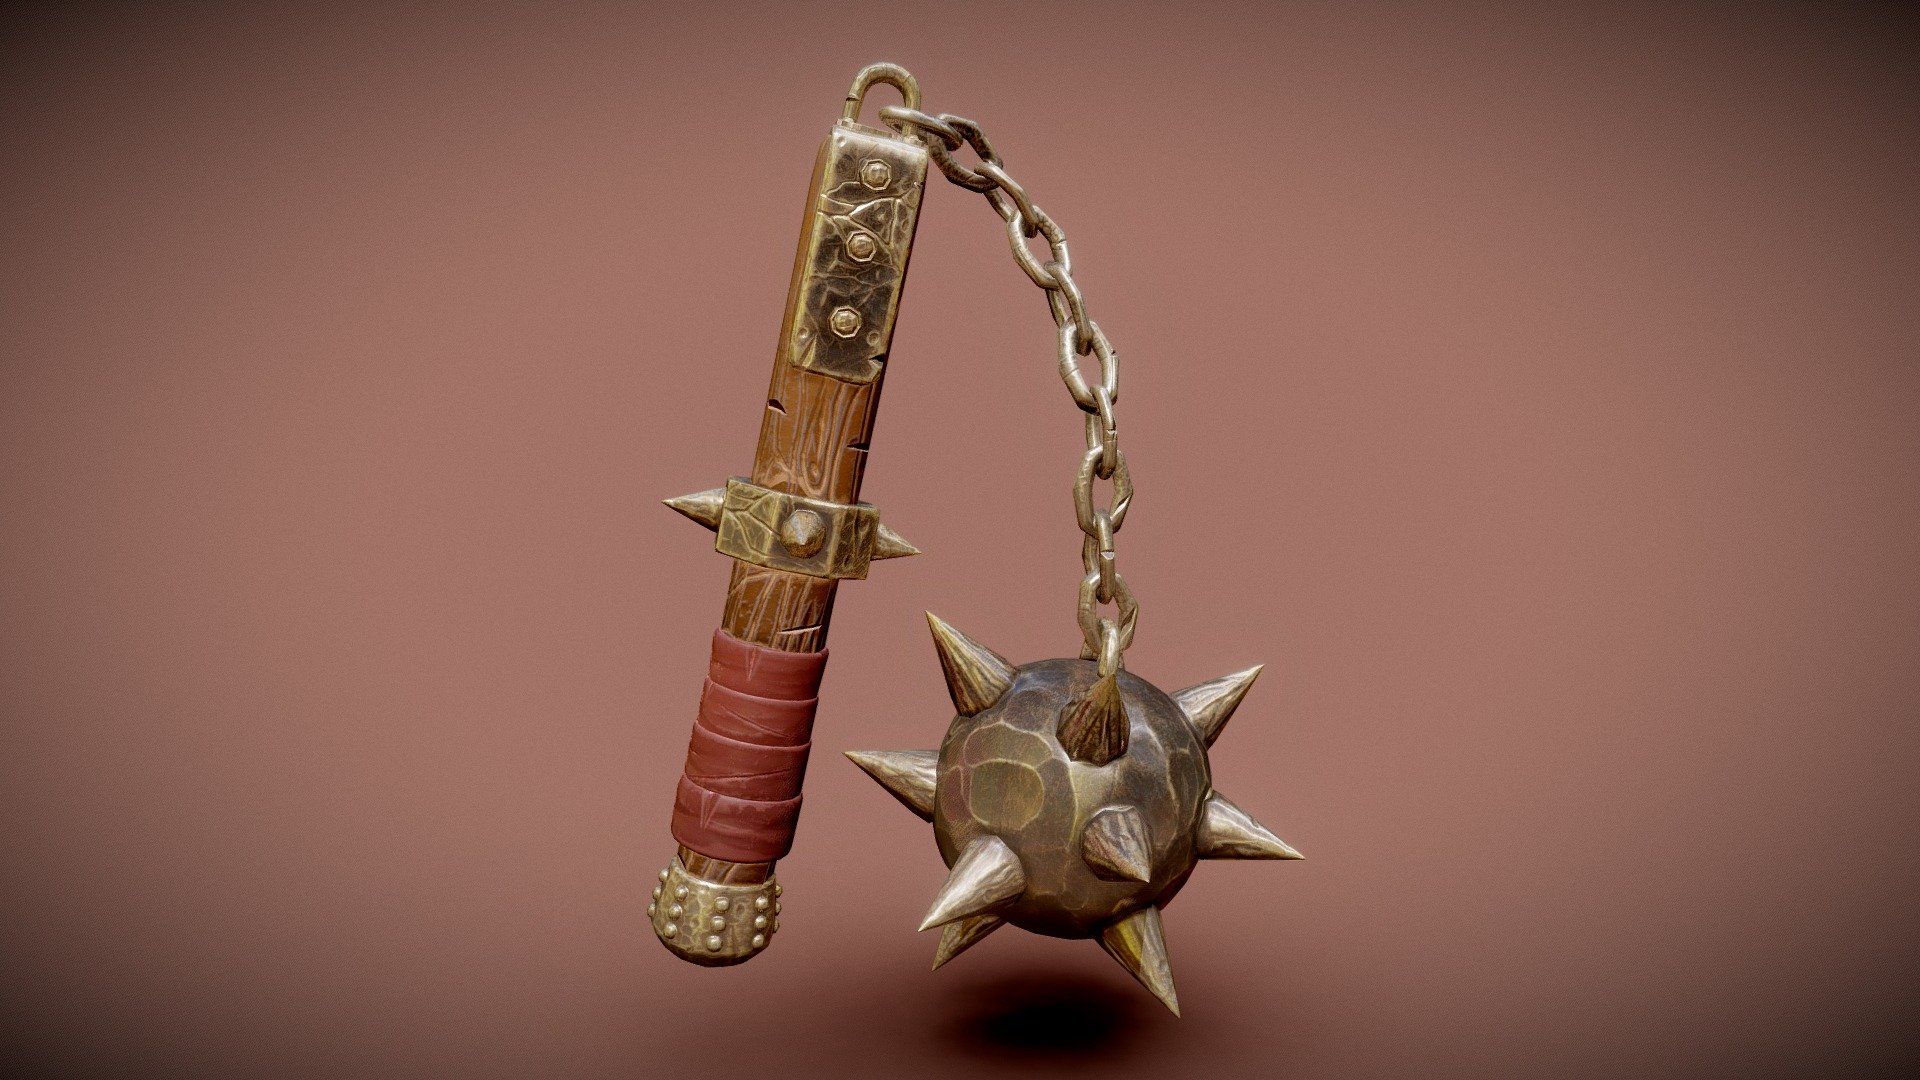 The Morning Star (Stylized Flail)